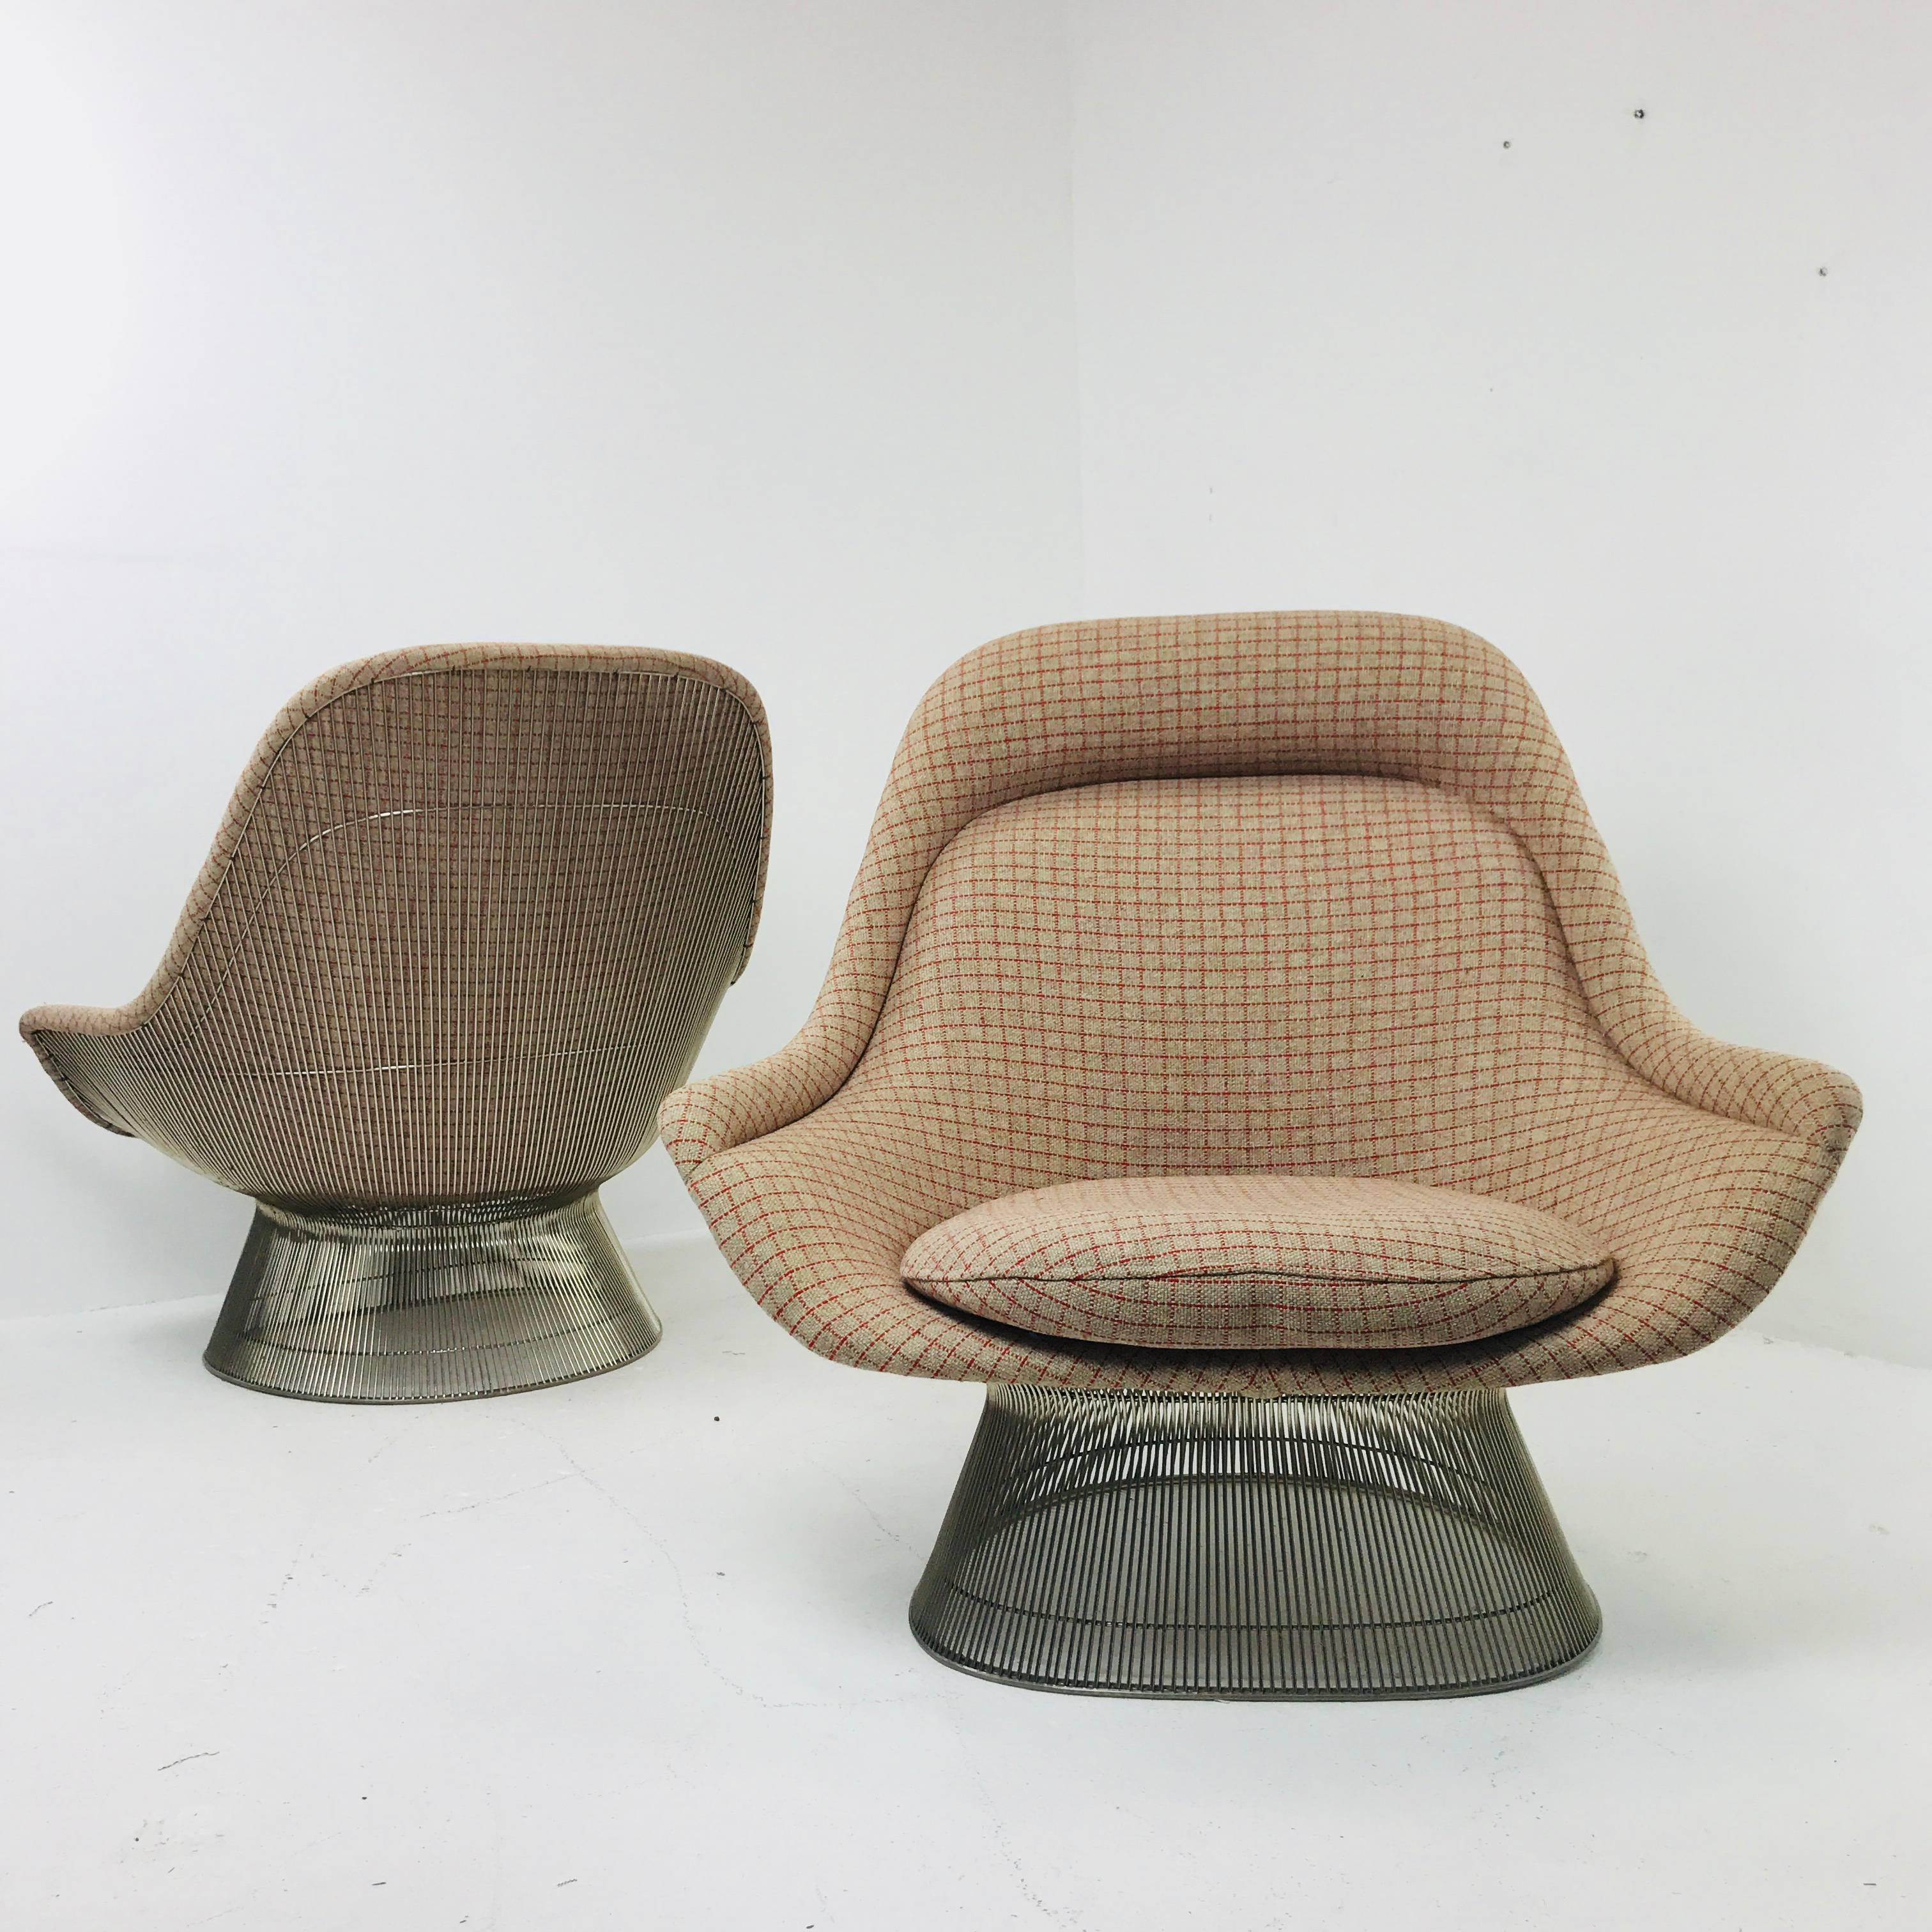 Pair of lounge chairs by Warren Platner. Lounge chairs are in good vintage condition with minimal wear due to age and use.

Dimensions:
42